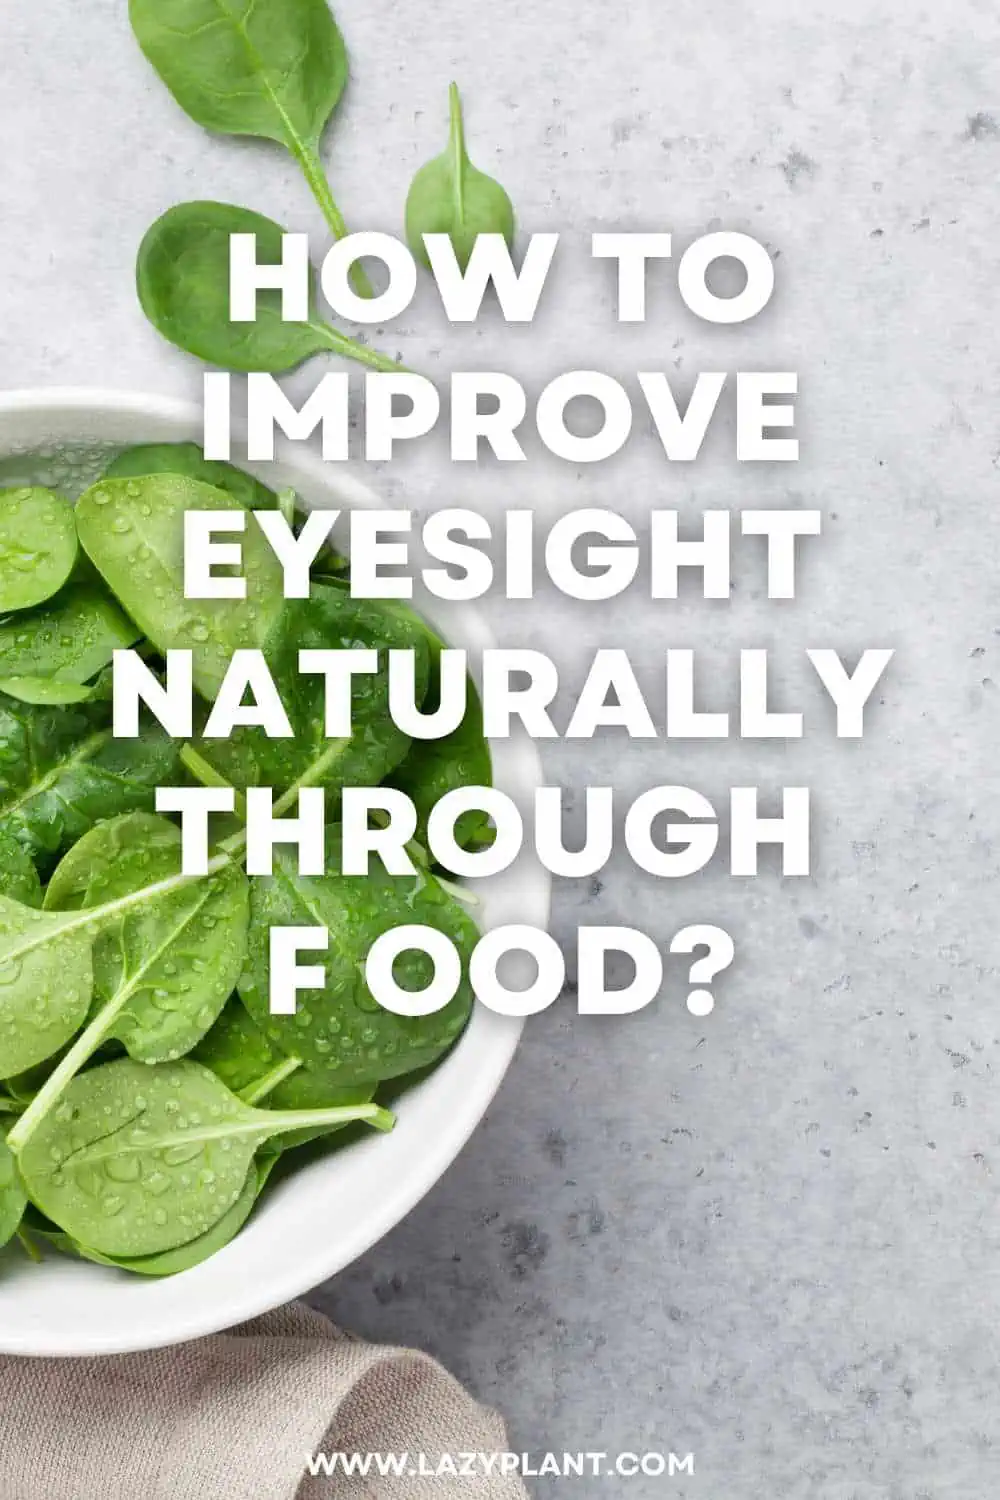 Can eyesight be improved naturally through diet, and if so, what foods should be consumed?